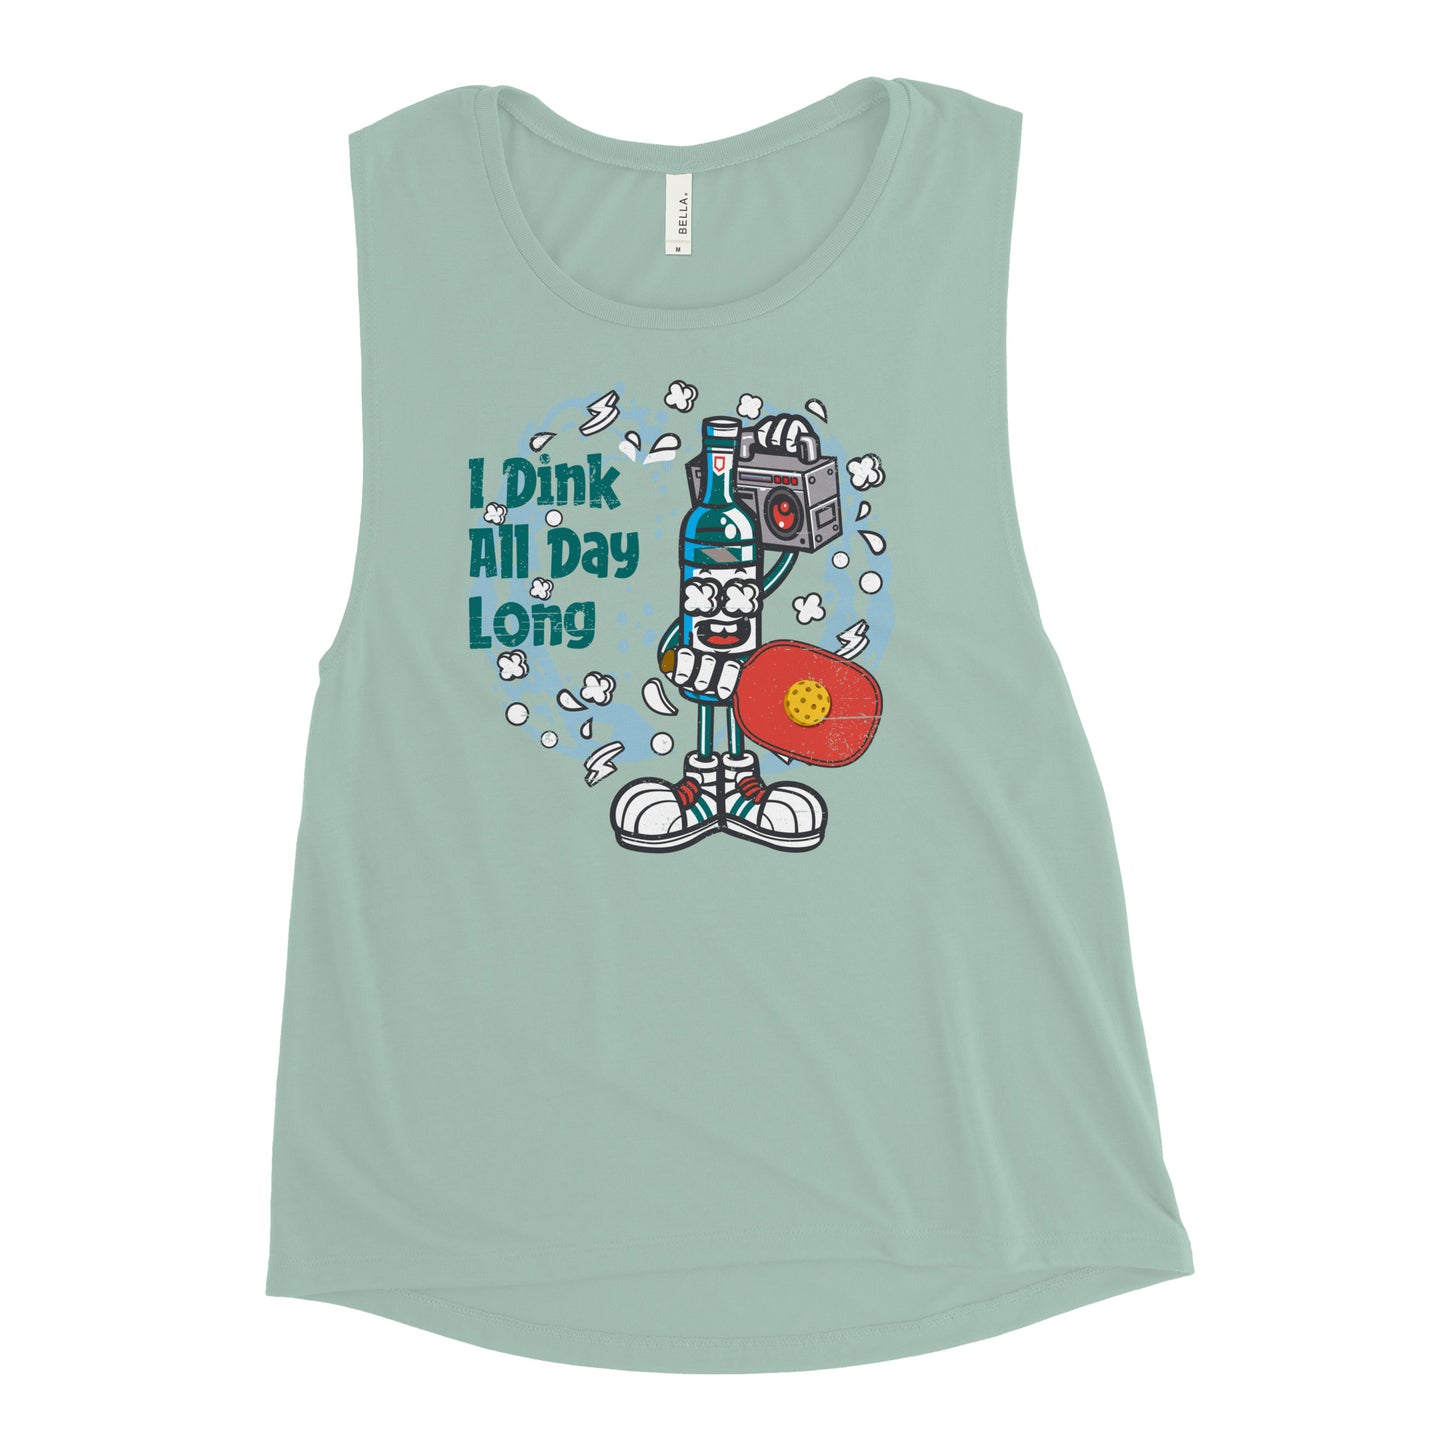 Ladies’ Best Pickleball Muscle Tank Top, "I Dink All Day"